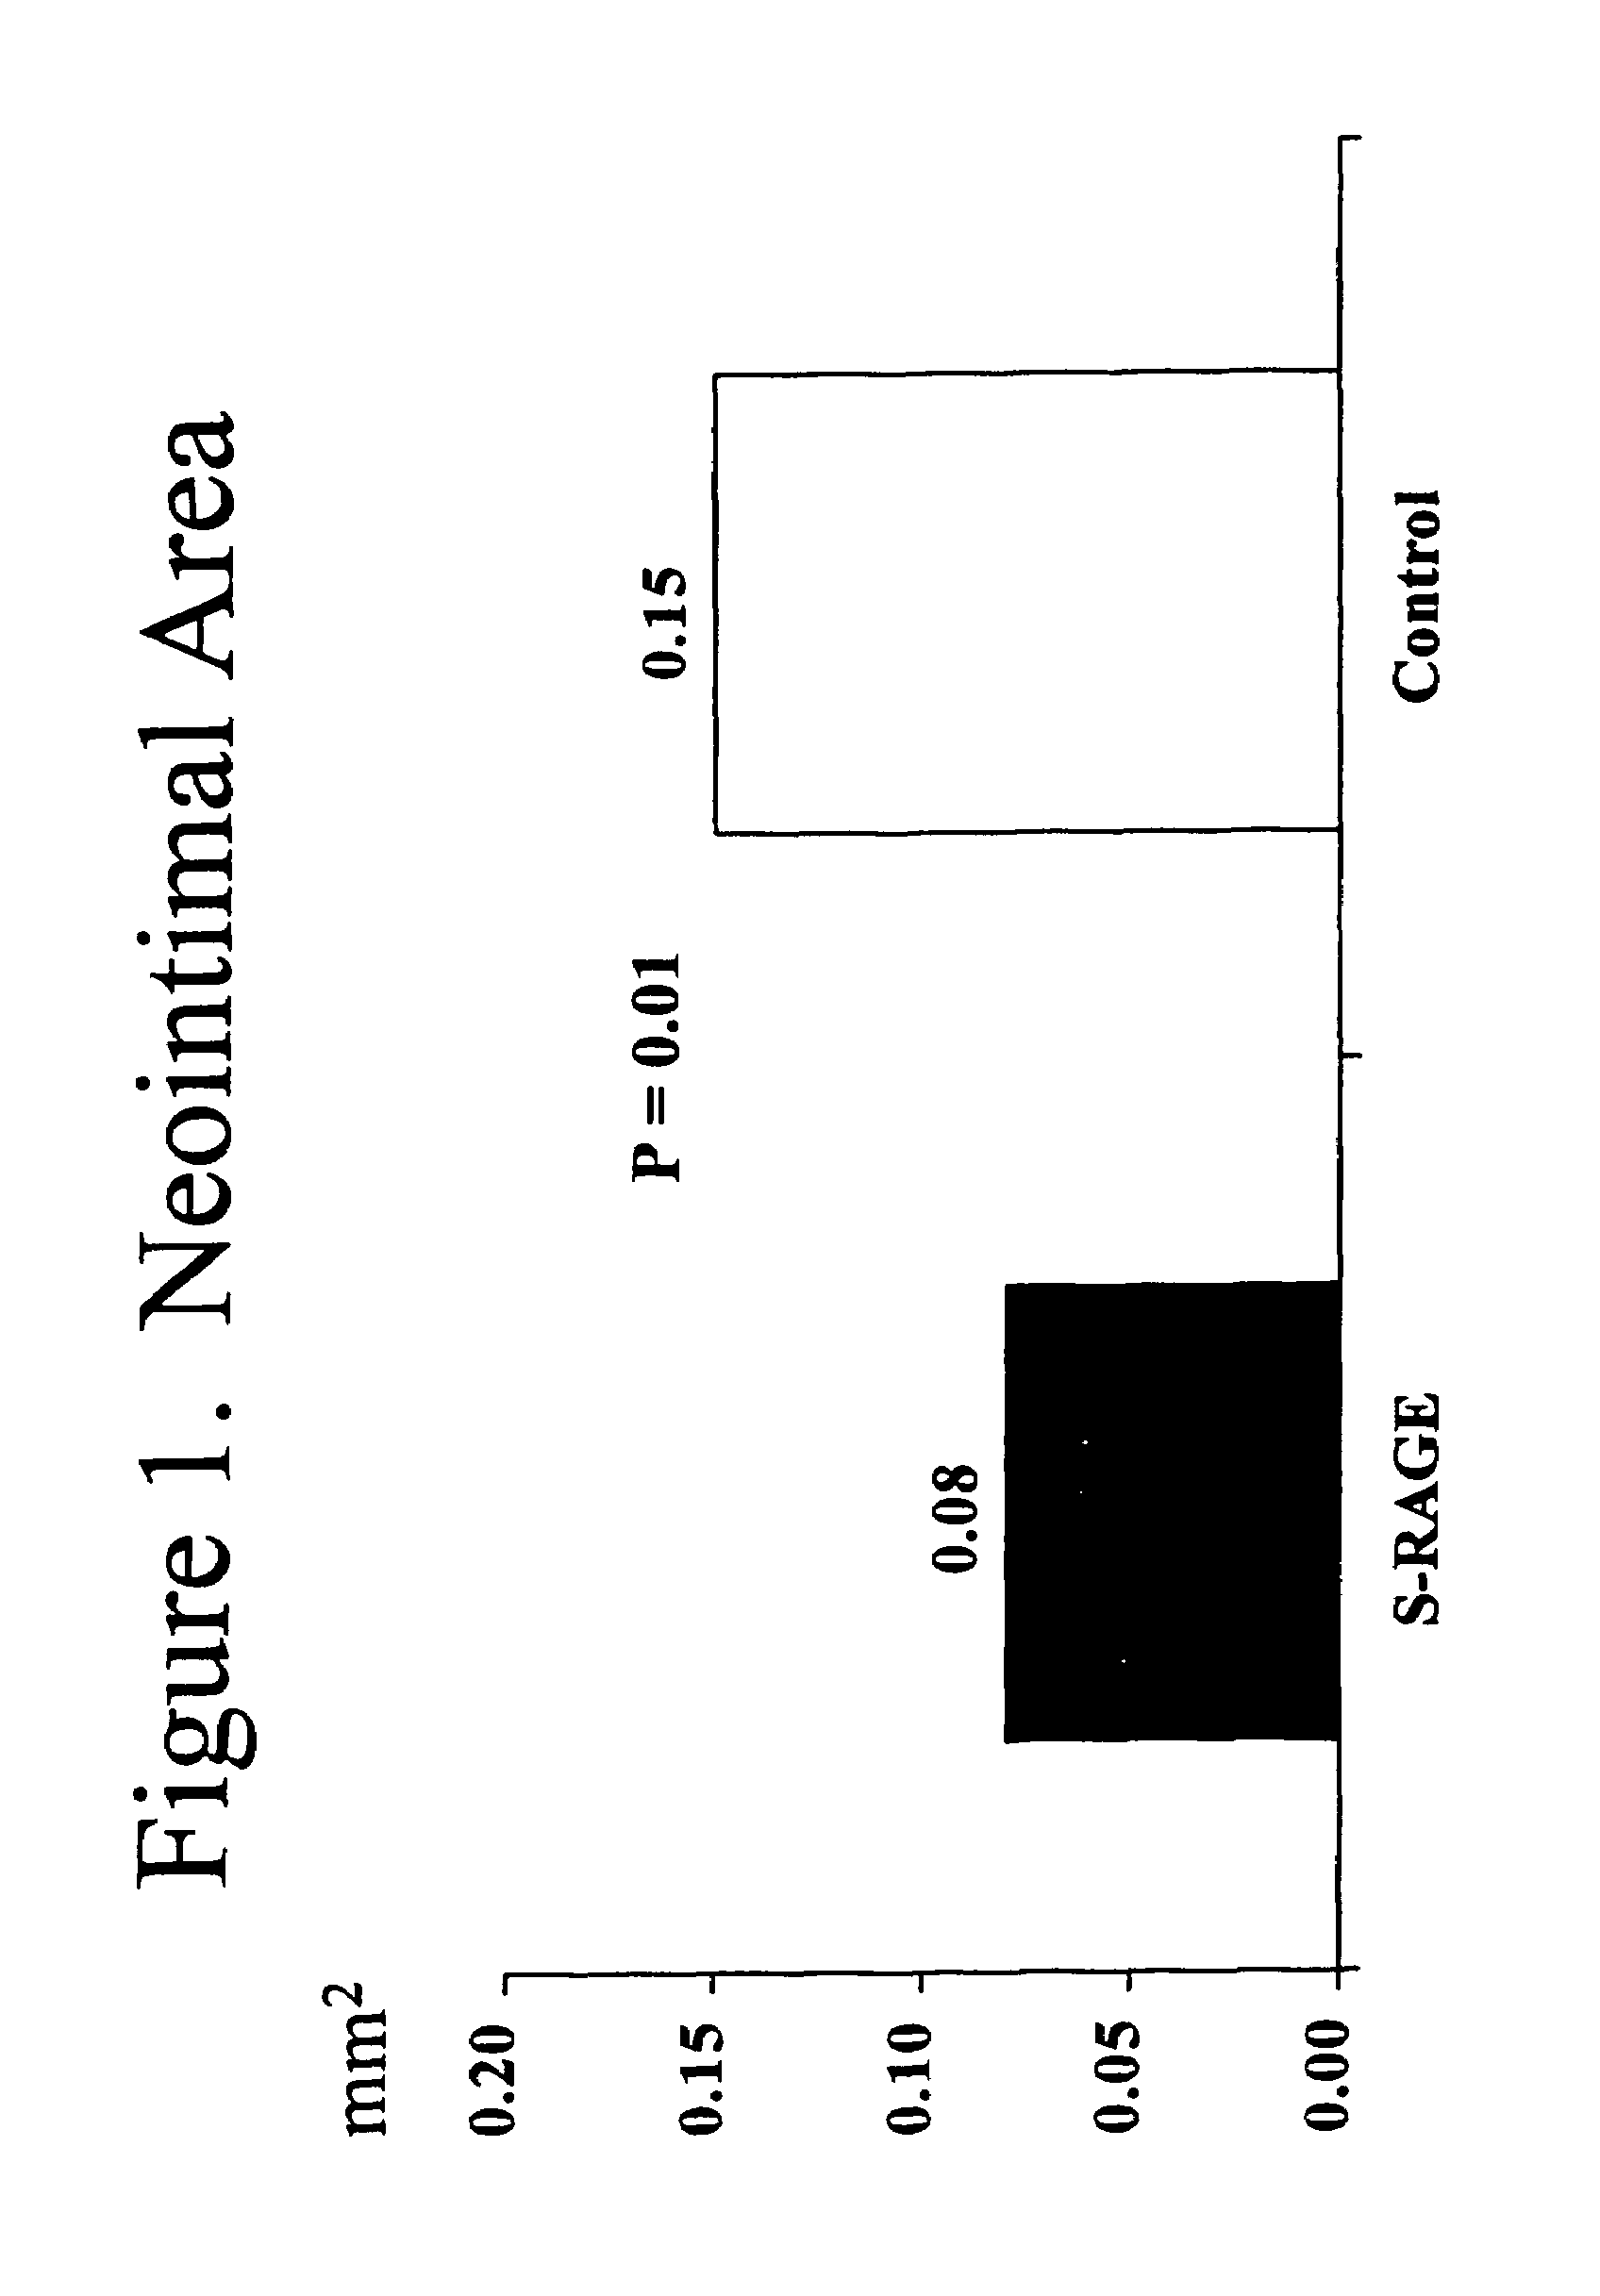 Method for inhibiting new tissue growth in blood vessels in a patient subjected to blood vessel injury